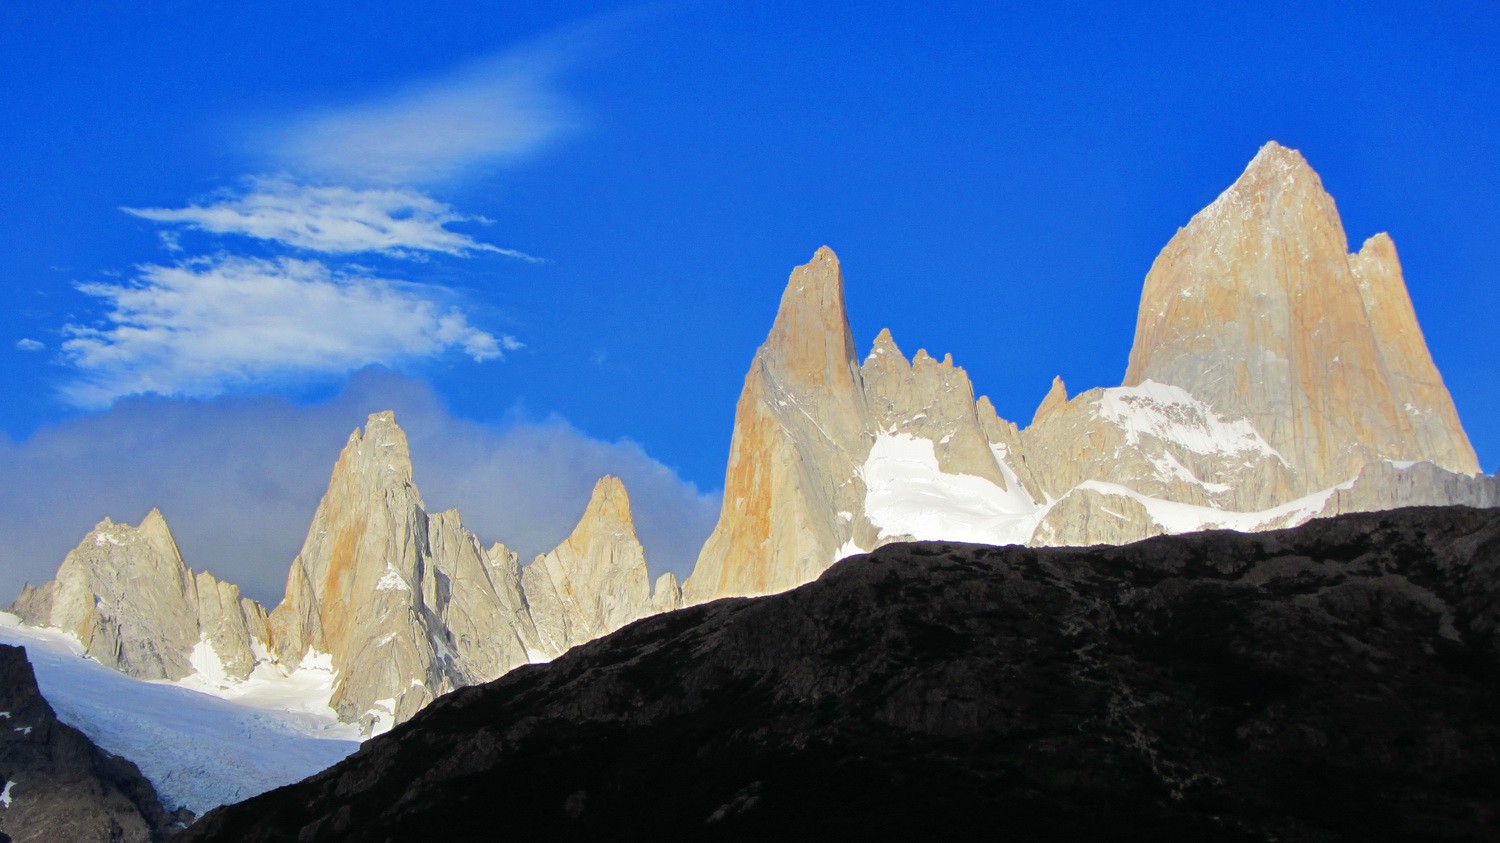 Cerro Fitz Roy with its southern pinnacles and Glaciar Rio Blanco